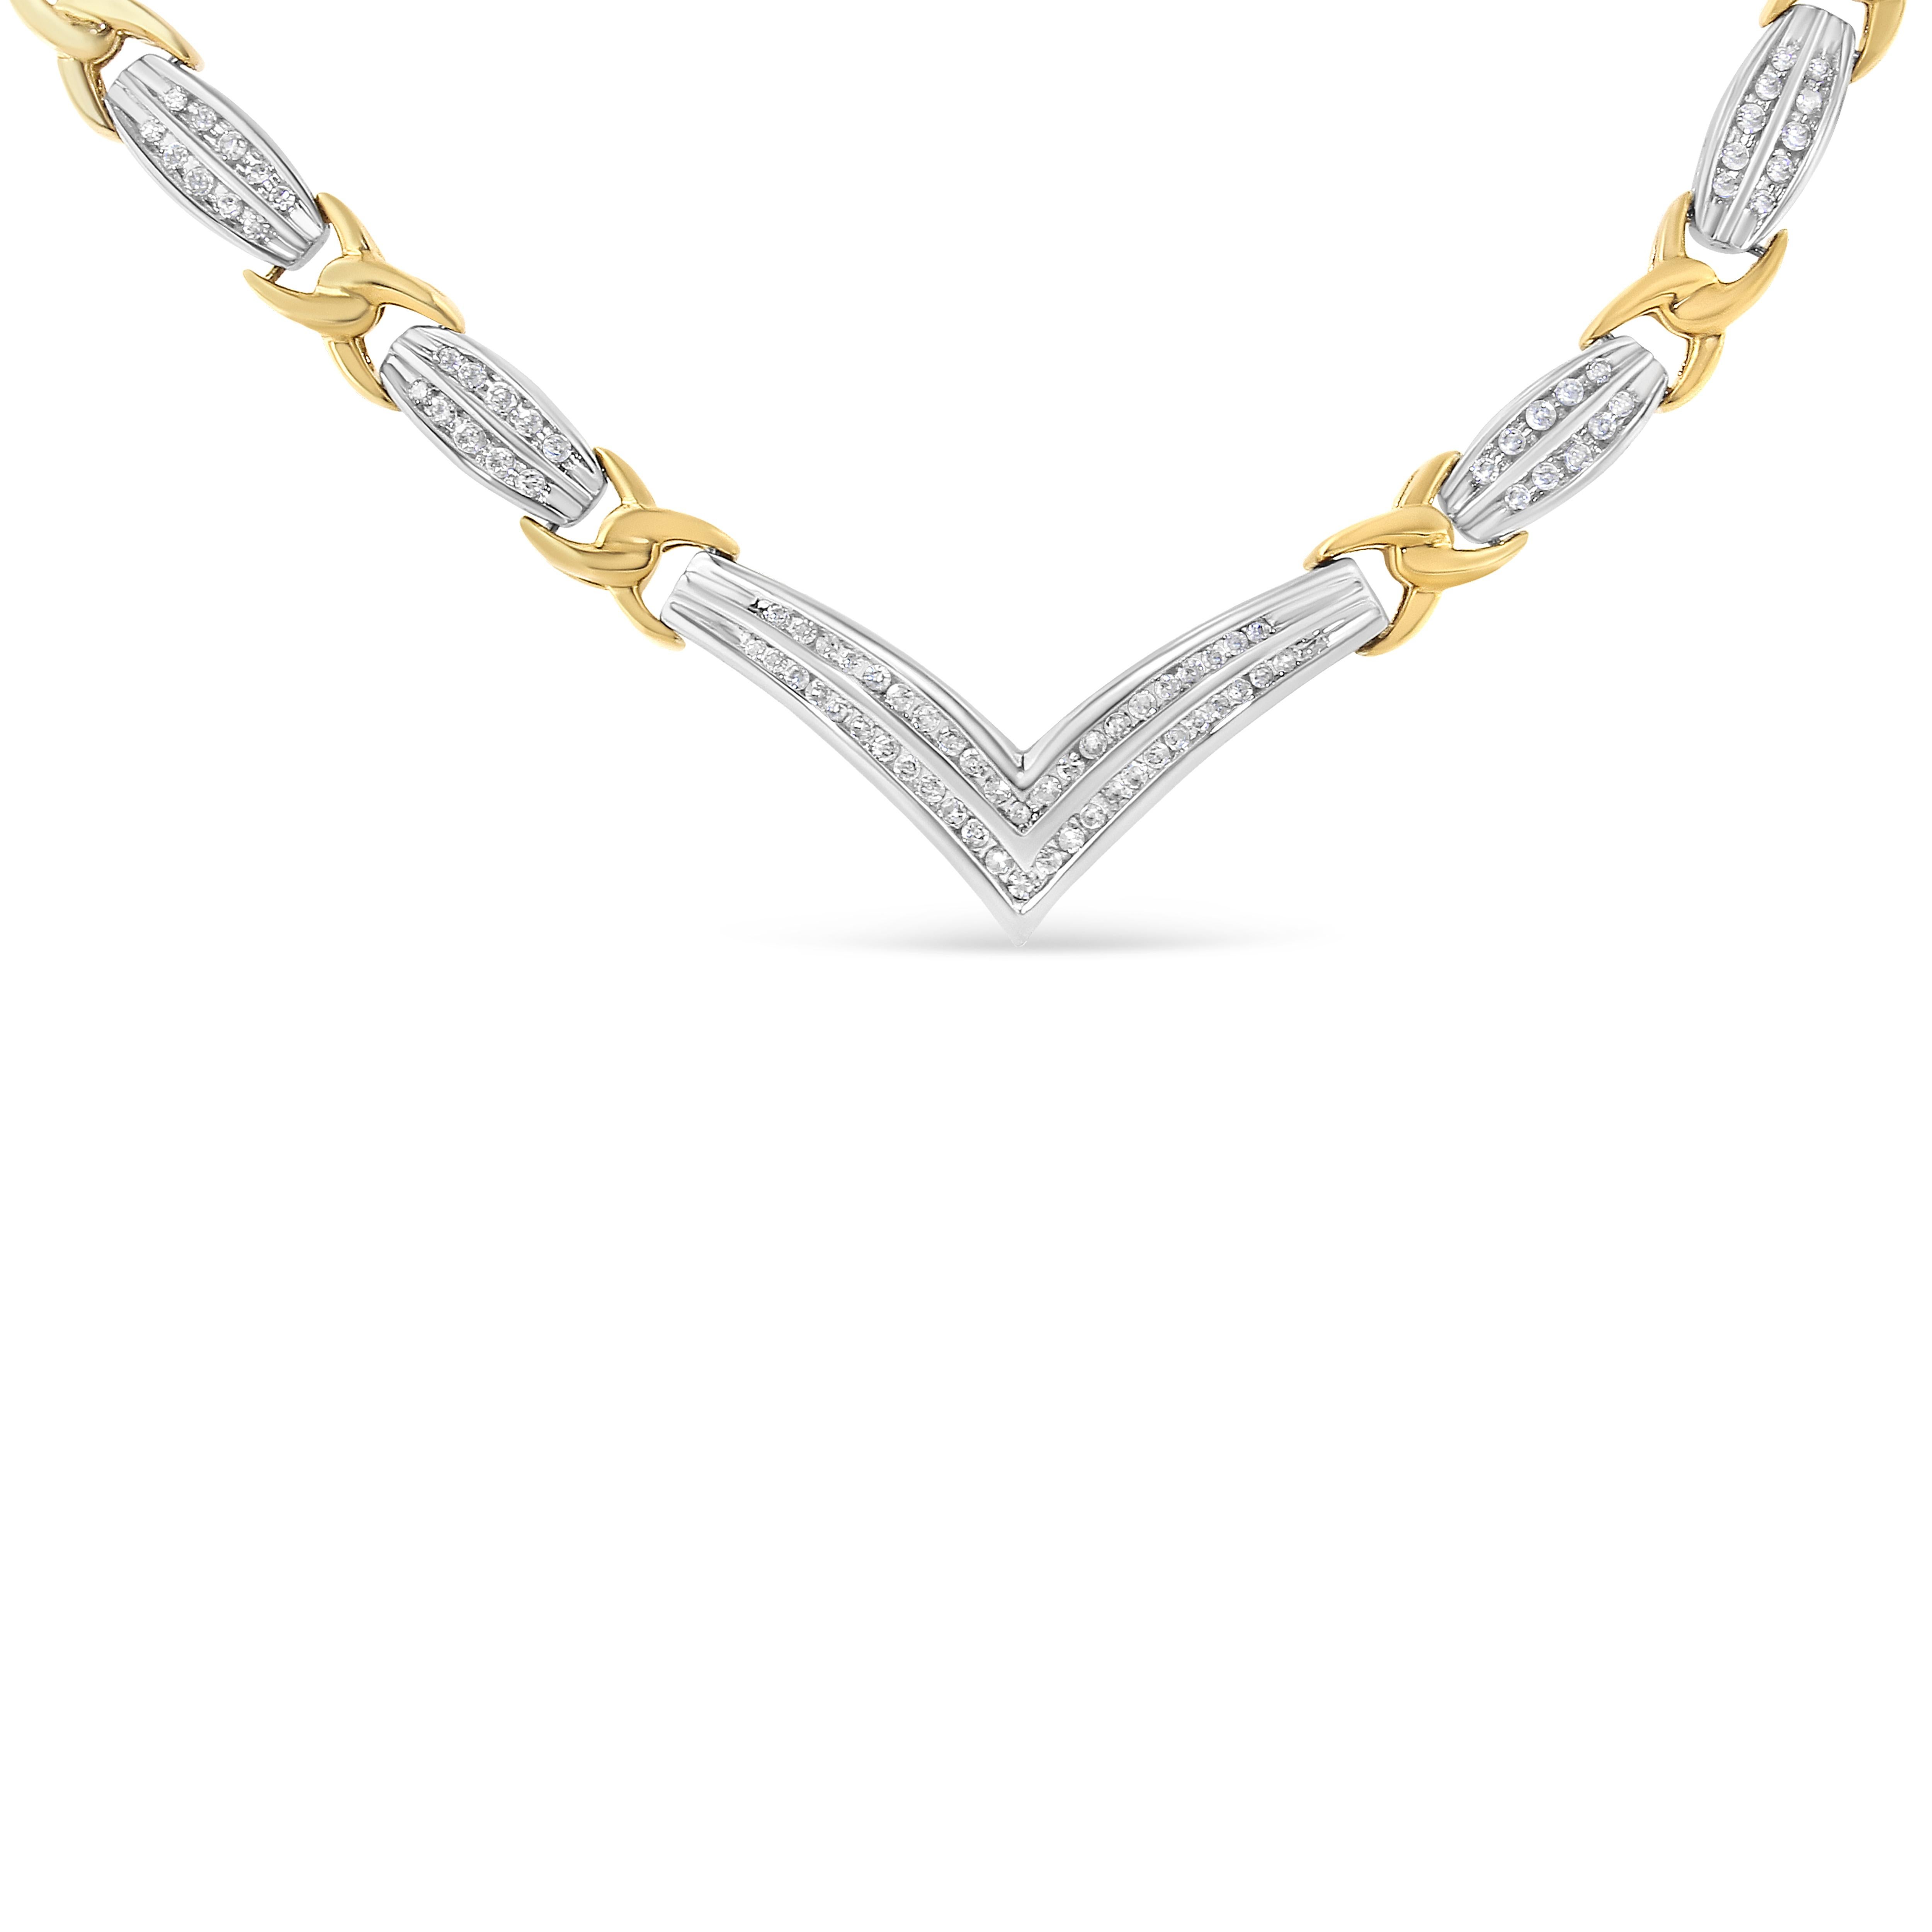 Surprise her by presenting this beautiful neck piece. This elegant piece is crafted from alluring weaves of 14k white and yellow gold. Formed in an elegant V shape, the necklace is set with alternating segments of yellow gold 